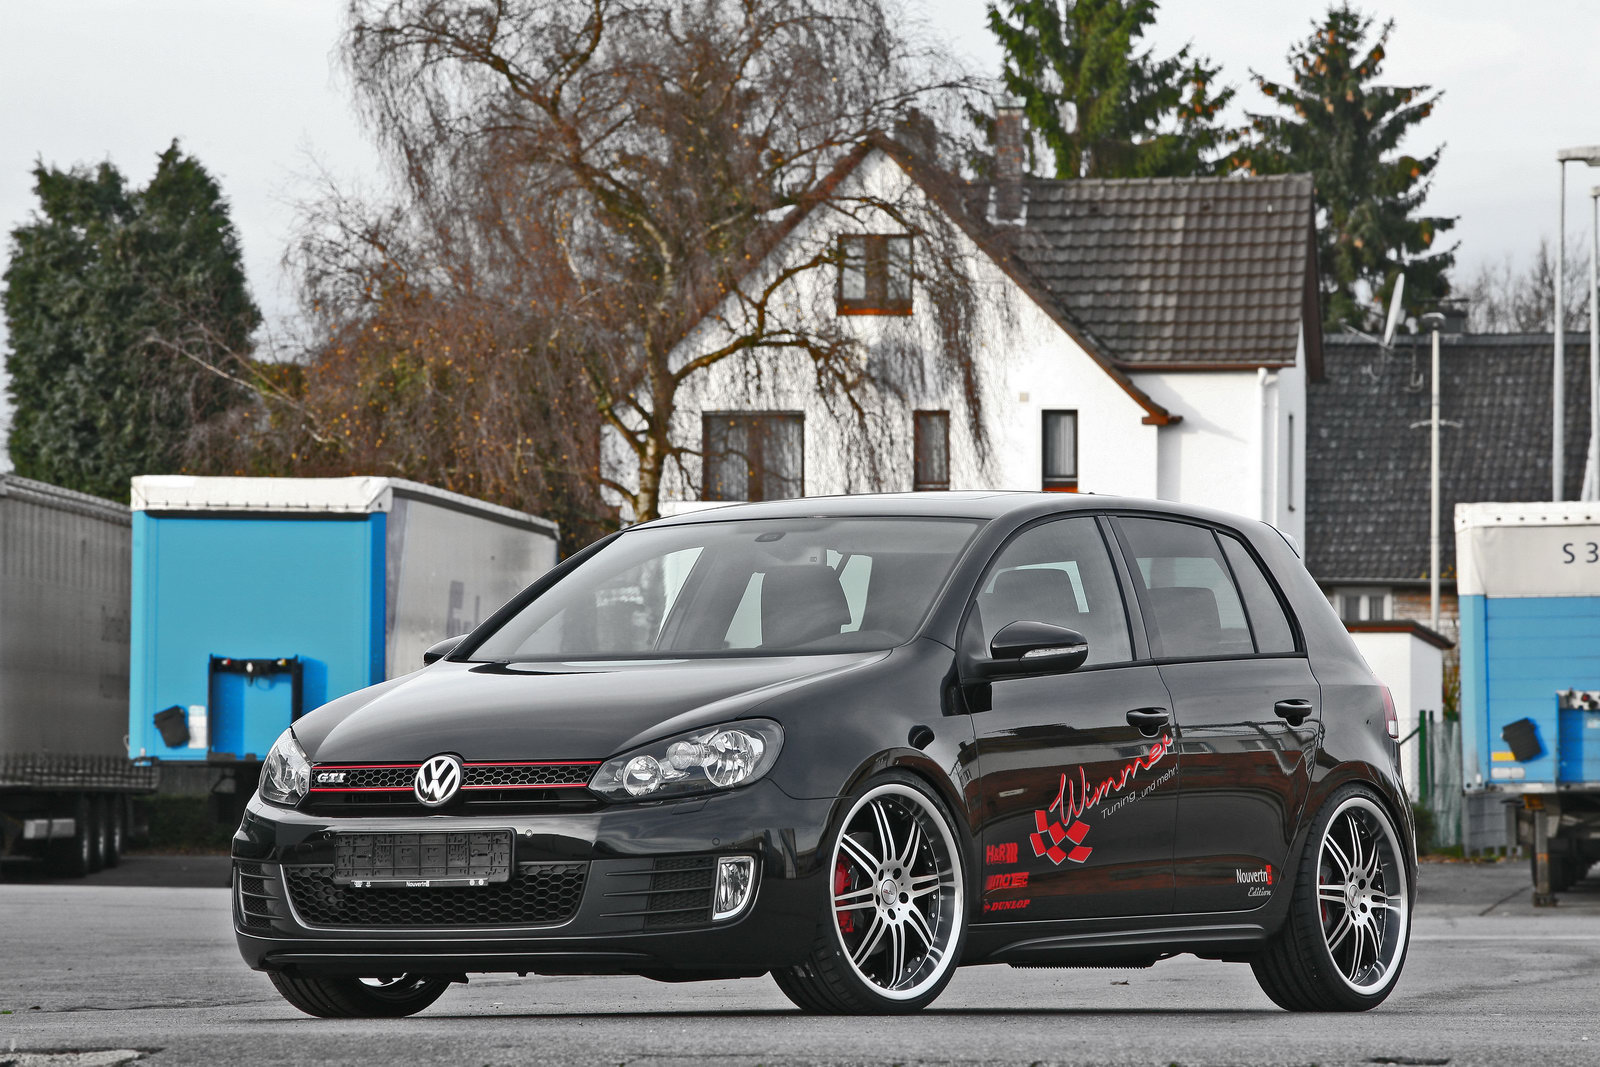 https://www.carscoops.com/wp-content/uploads/2009/12/393a2a82-wimmer-rs-volkswagen-golf-gti-8.jpg